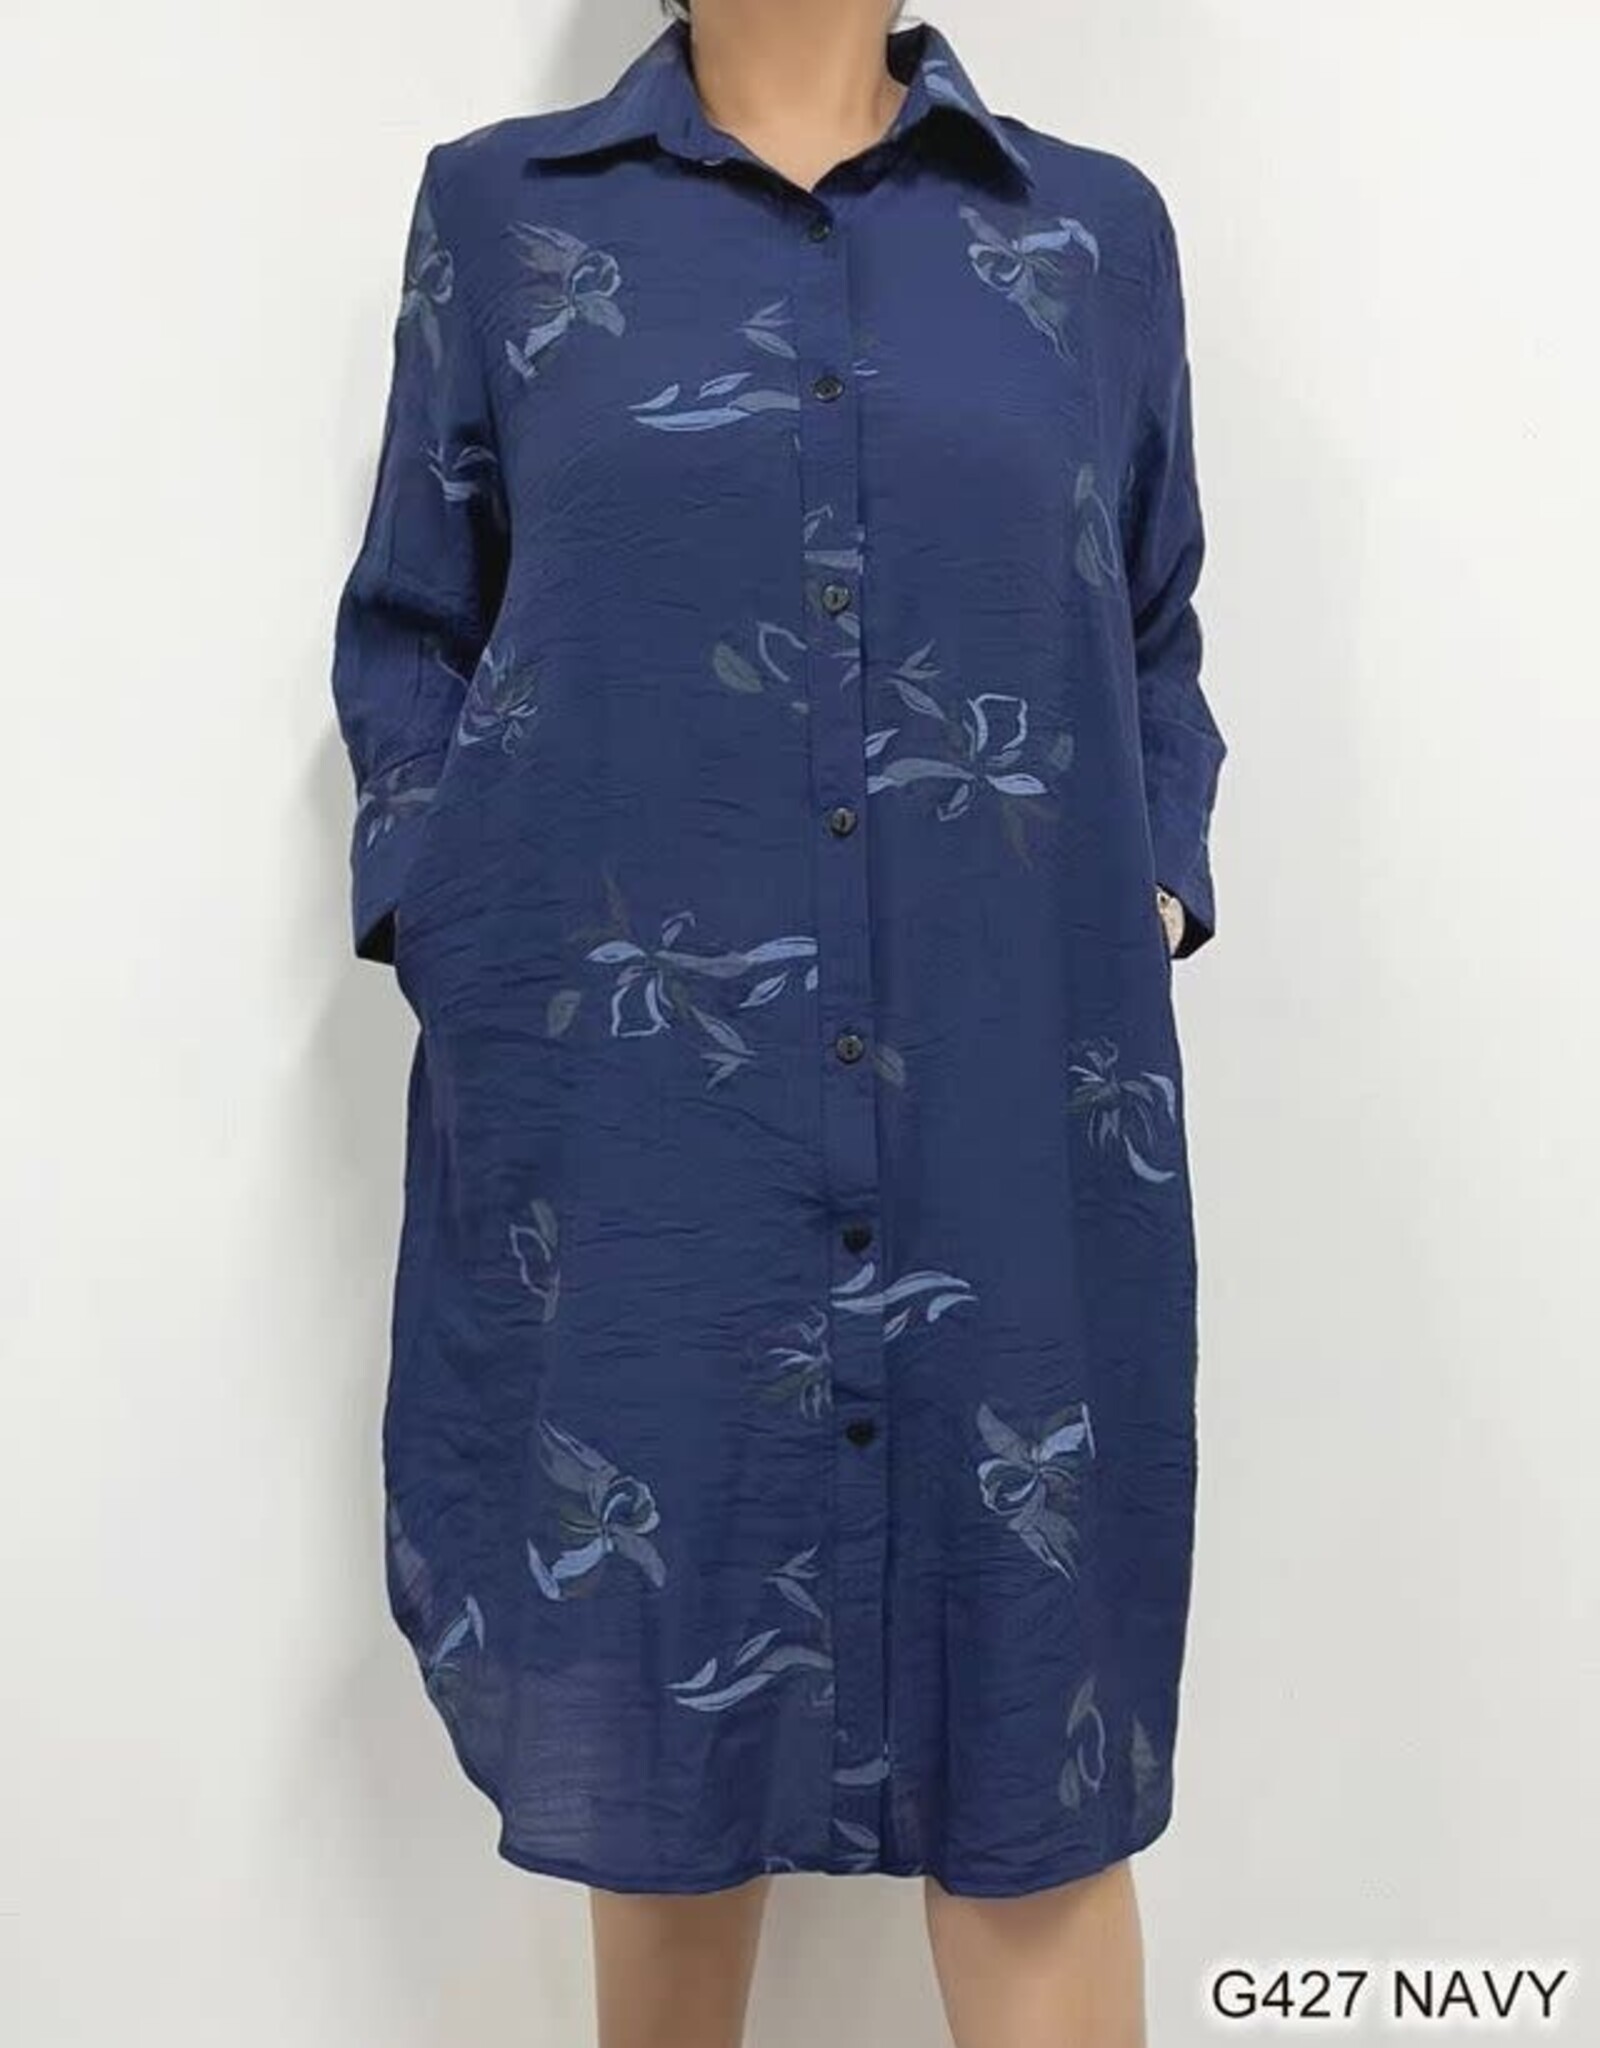 - Navy w/Grey Abstract Floral Print Button Up 3/4 Sleeve Shirt-Dress